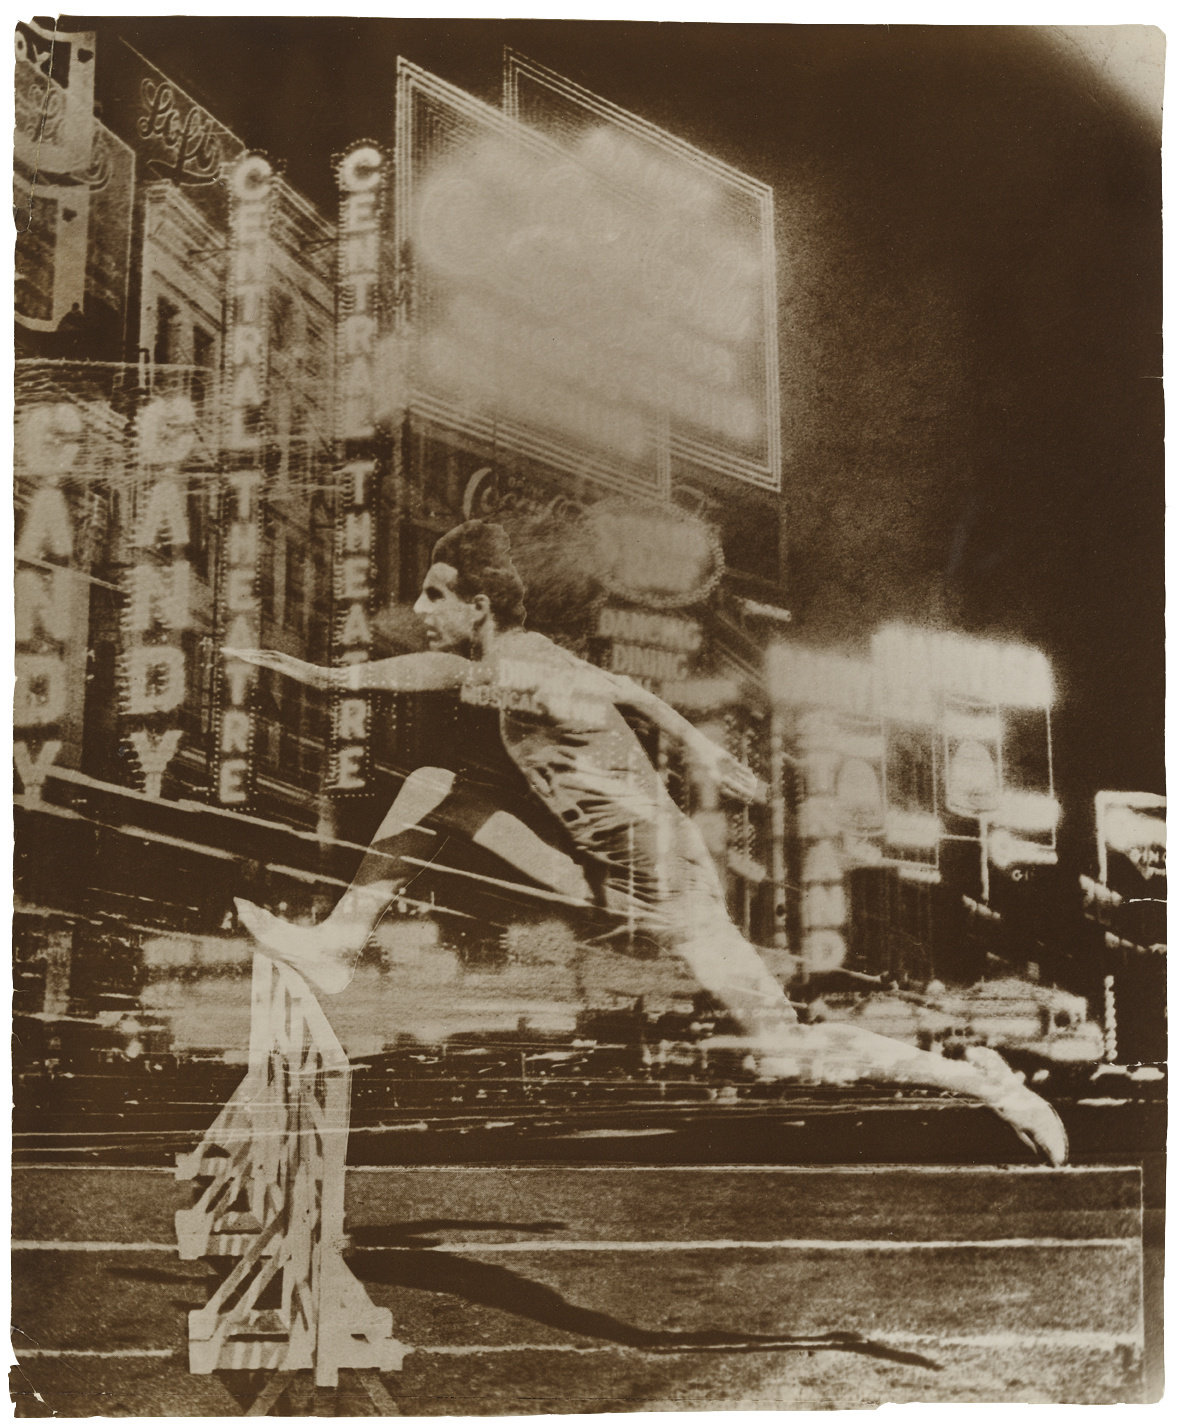 El Lissitzky. Runner in the City, 1925-26